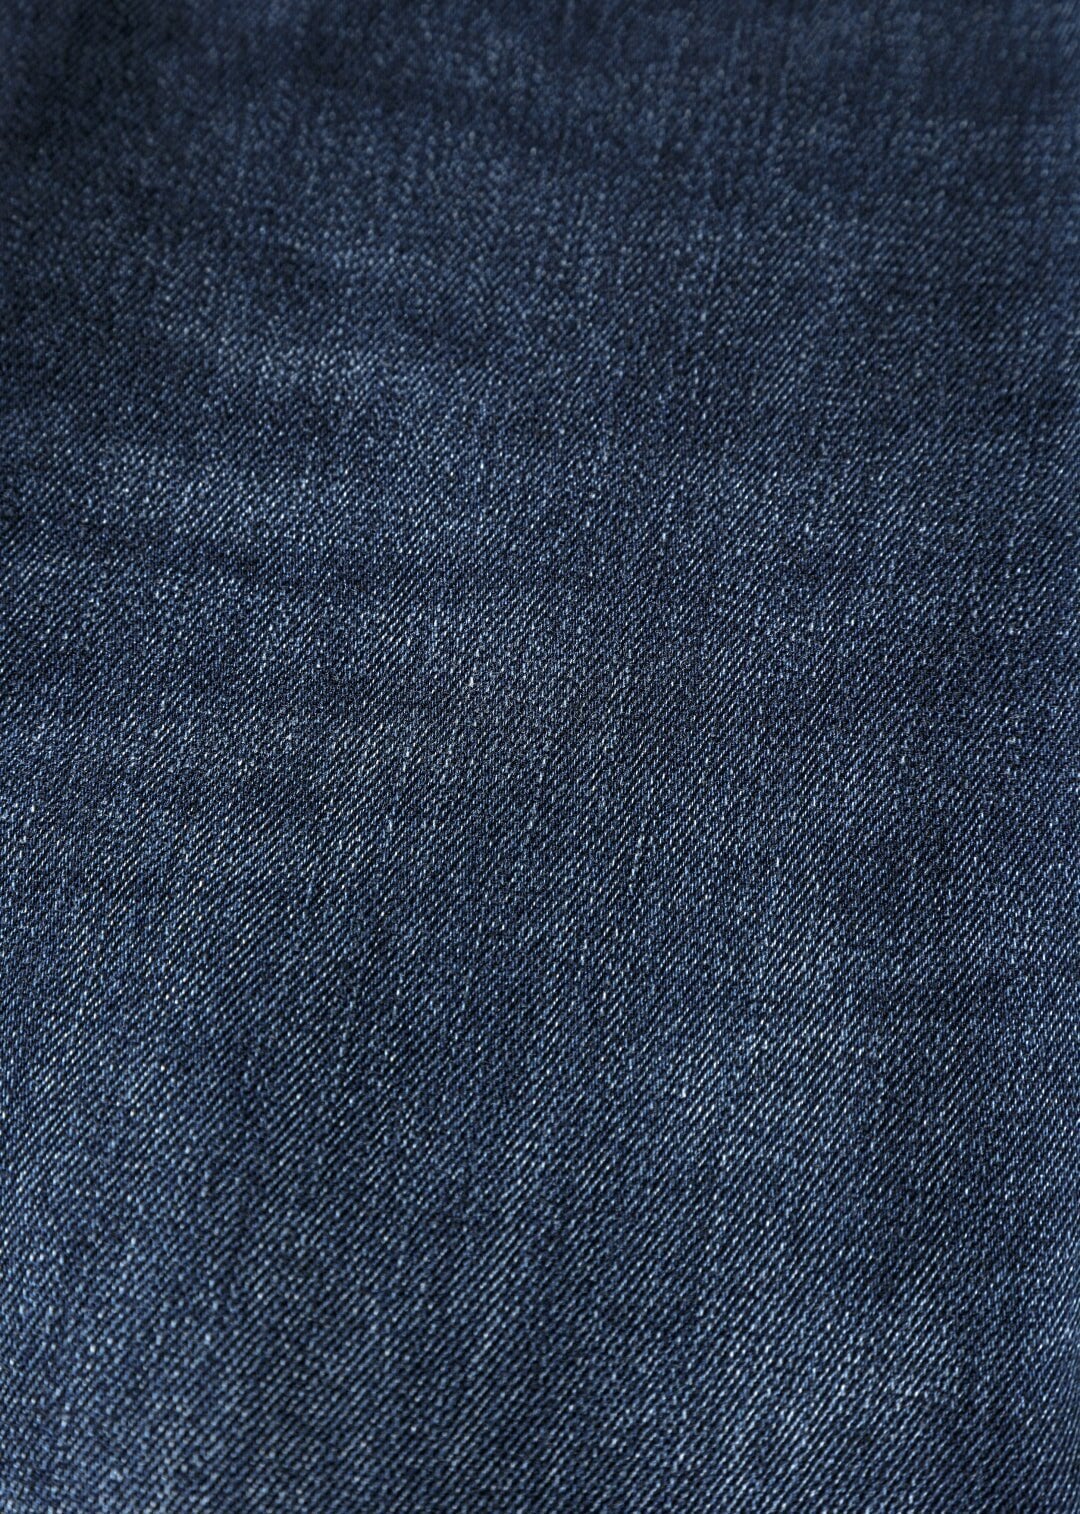 Buy Cotton Woven Fabric With Structure Light Grey Trouser Fabric Denim  Fabric Gabardine by the Meter Online in India - Etsy